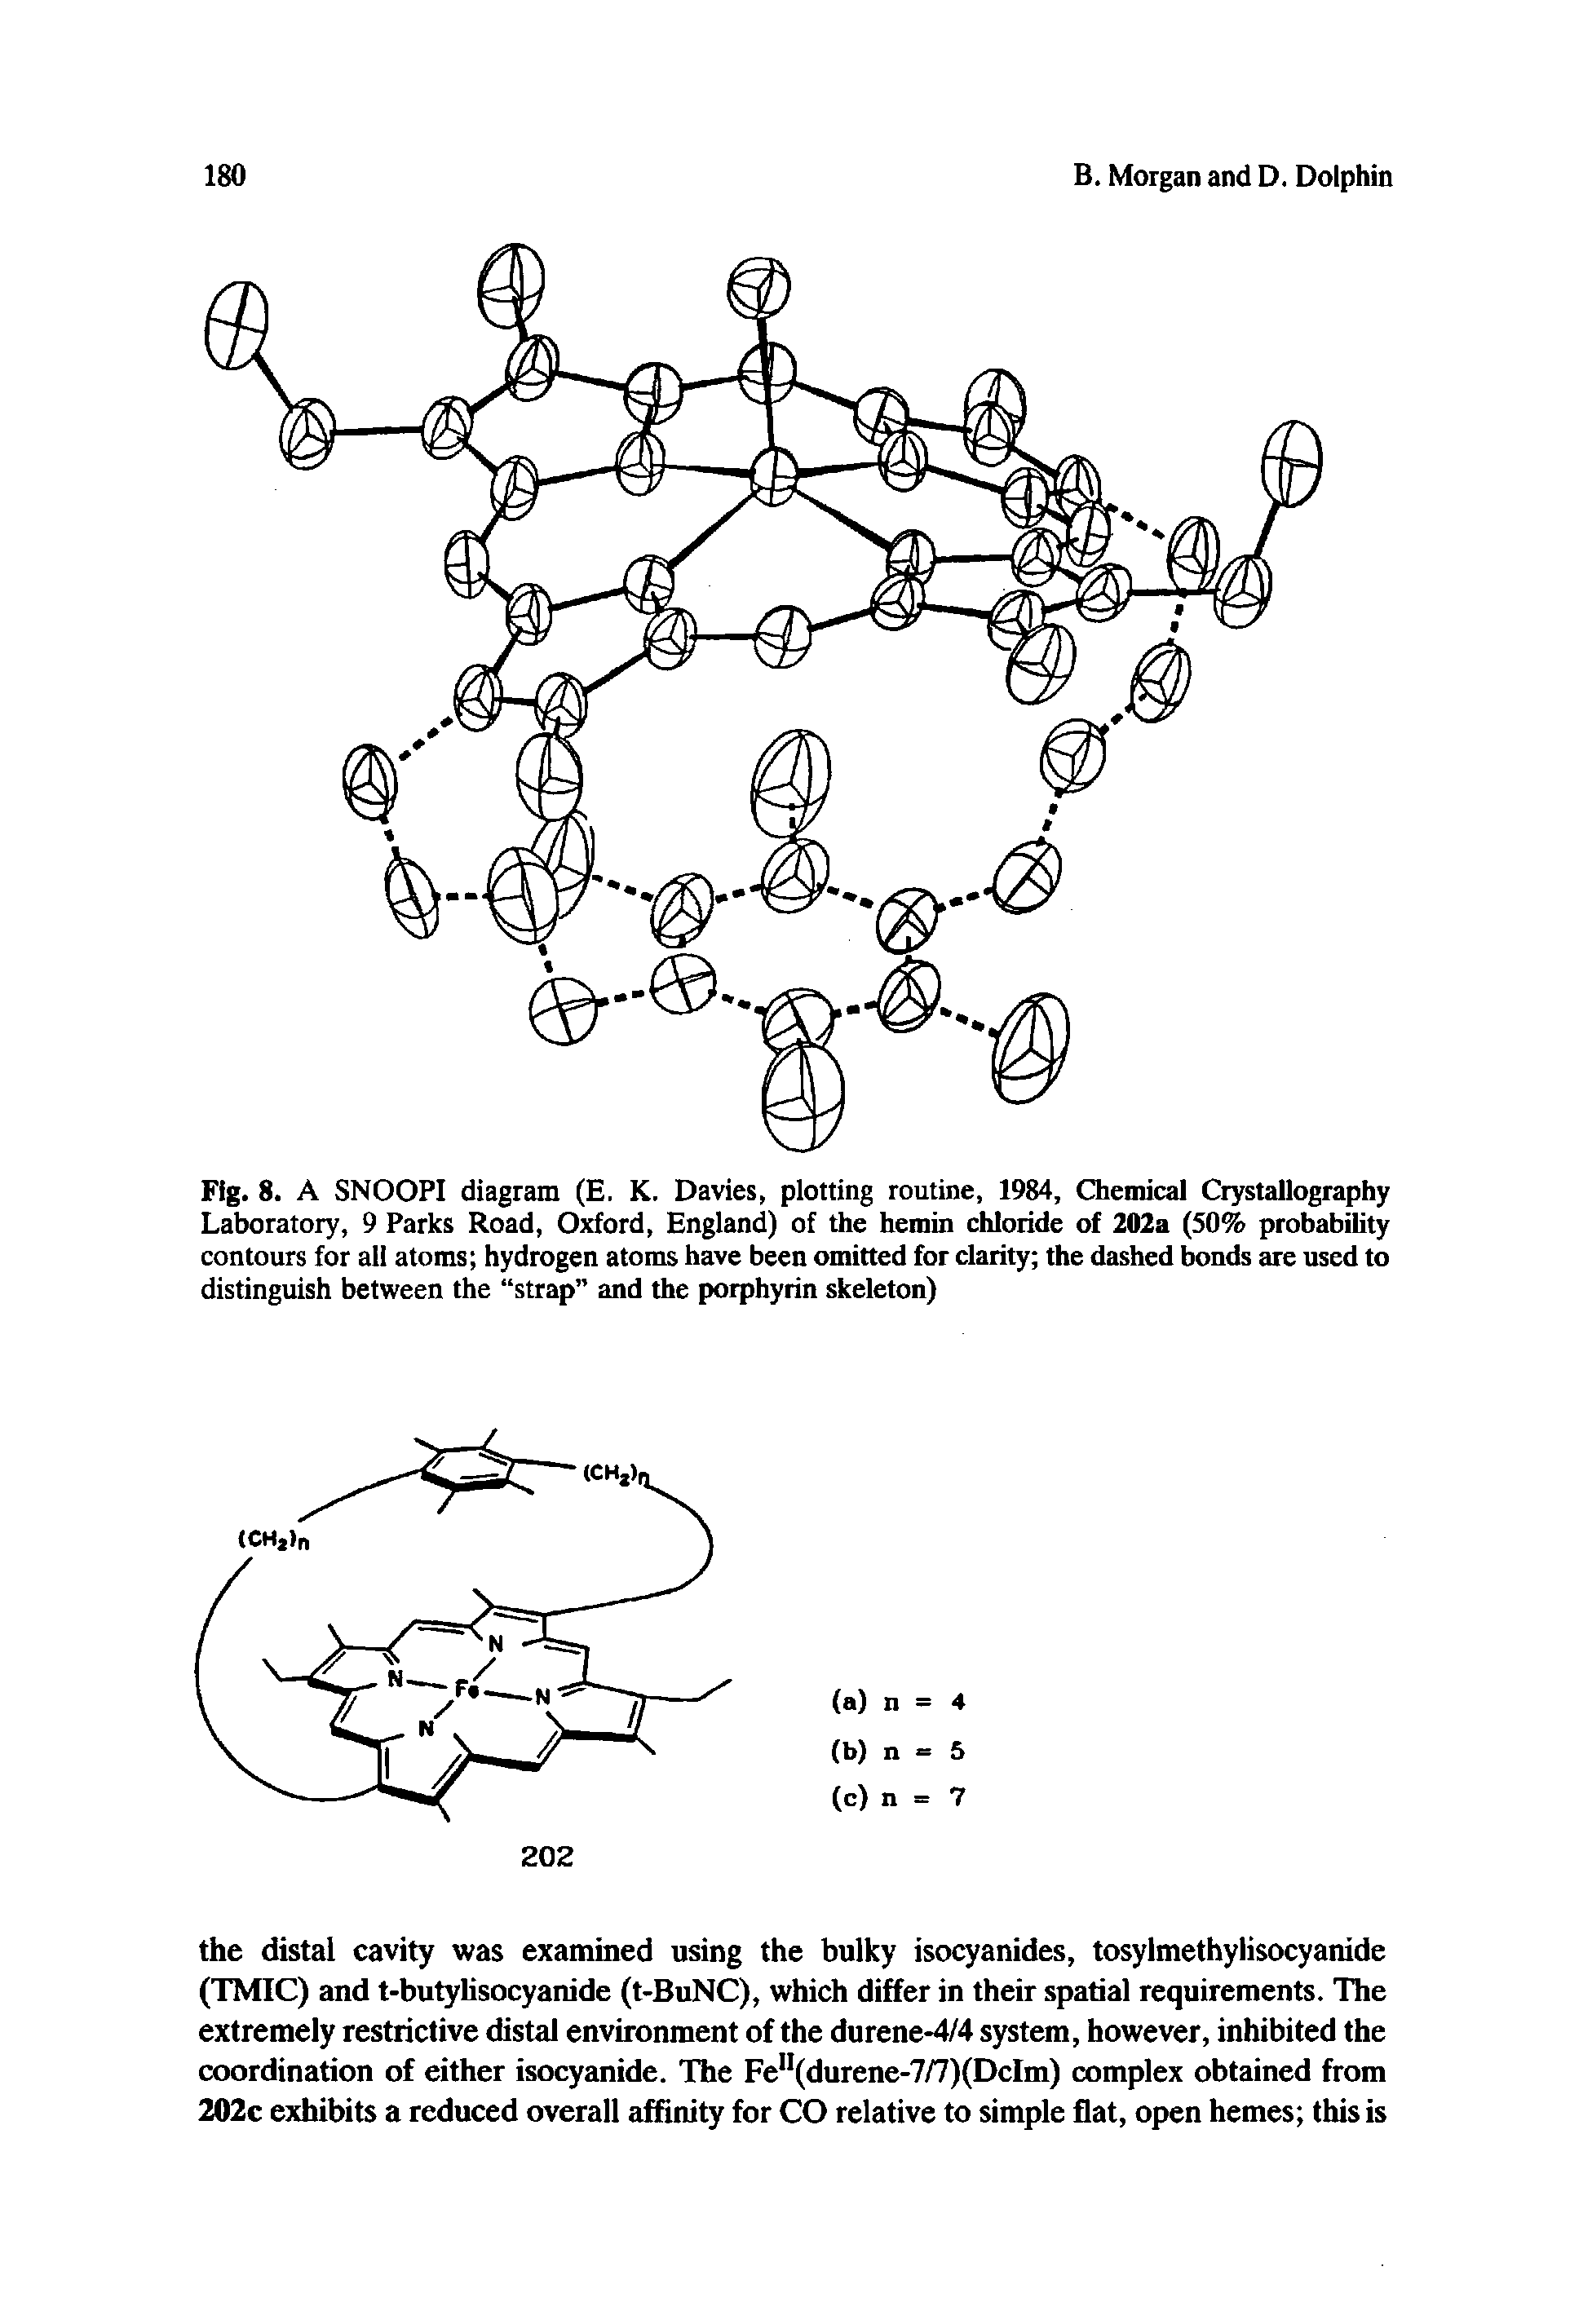 Fig. 8. A SNOOPI diagram (E. K. Davies, plotting routine, 1984, Chemical Crystallography Laboratory, 9 Parks Road, Oxford, England) of the hemin chloride of 202a (50% probability contours for all atoms hydrogen atoms have been omitted for clarity the dashed bonds are used to distinguish between the strap and the porphyrin skeleton)...